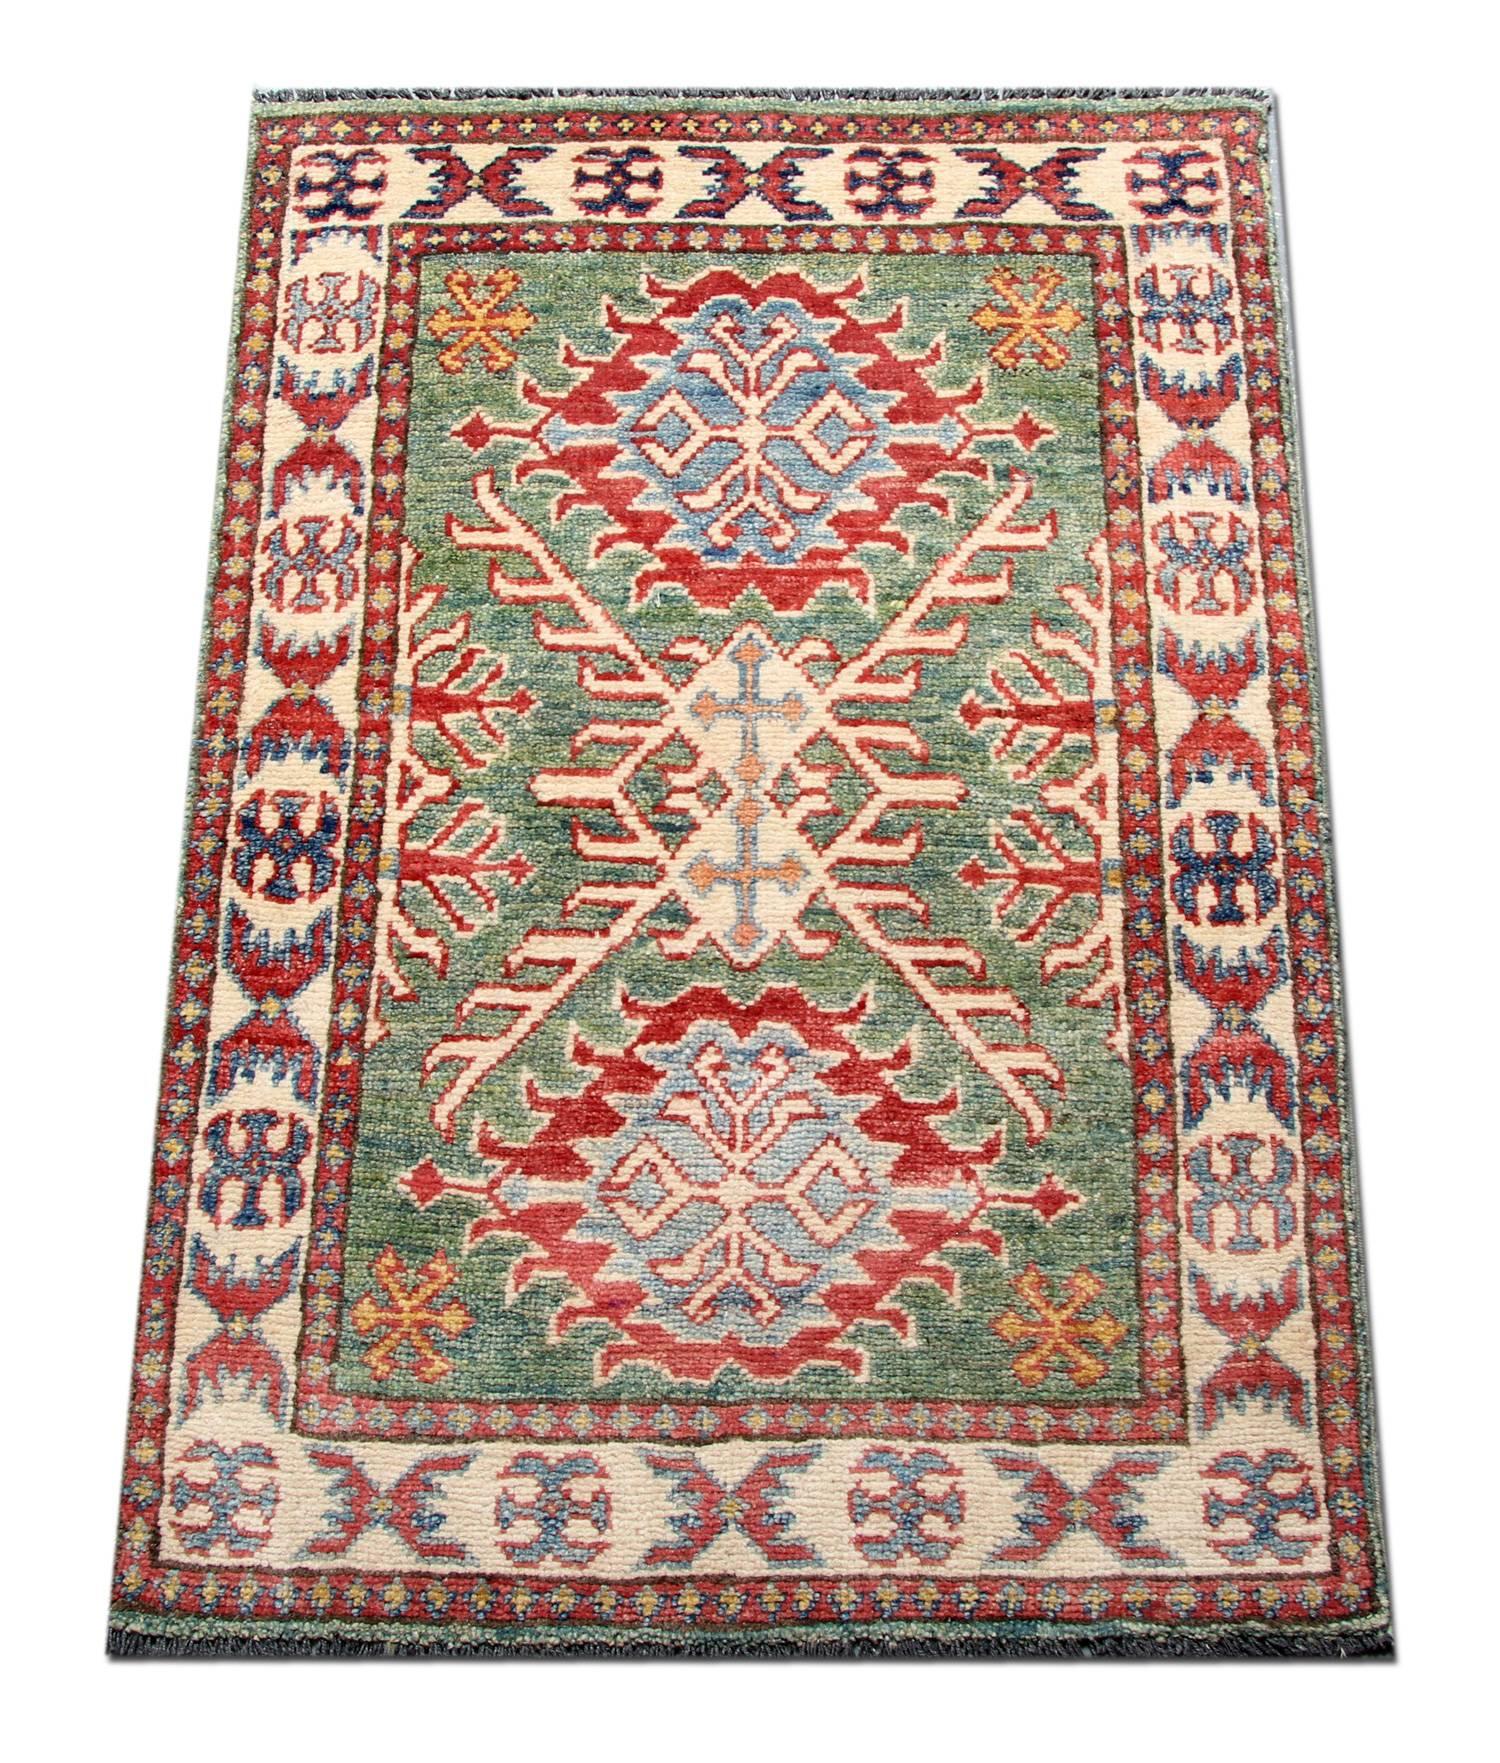 A beautiful new traditional Afghan Kazak rug, featuring a traditional tribal medallion design woven in accents of red, Green, and cream, through the centre on an aqua blue field. The design is then finished with a highly-detailed repeat pattern